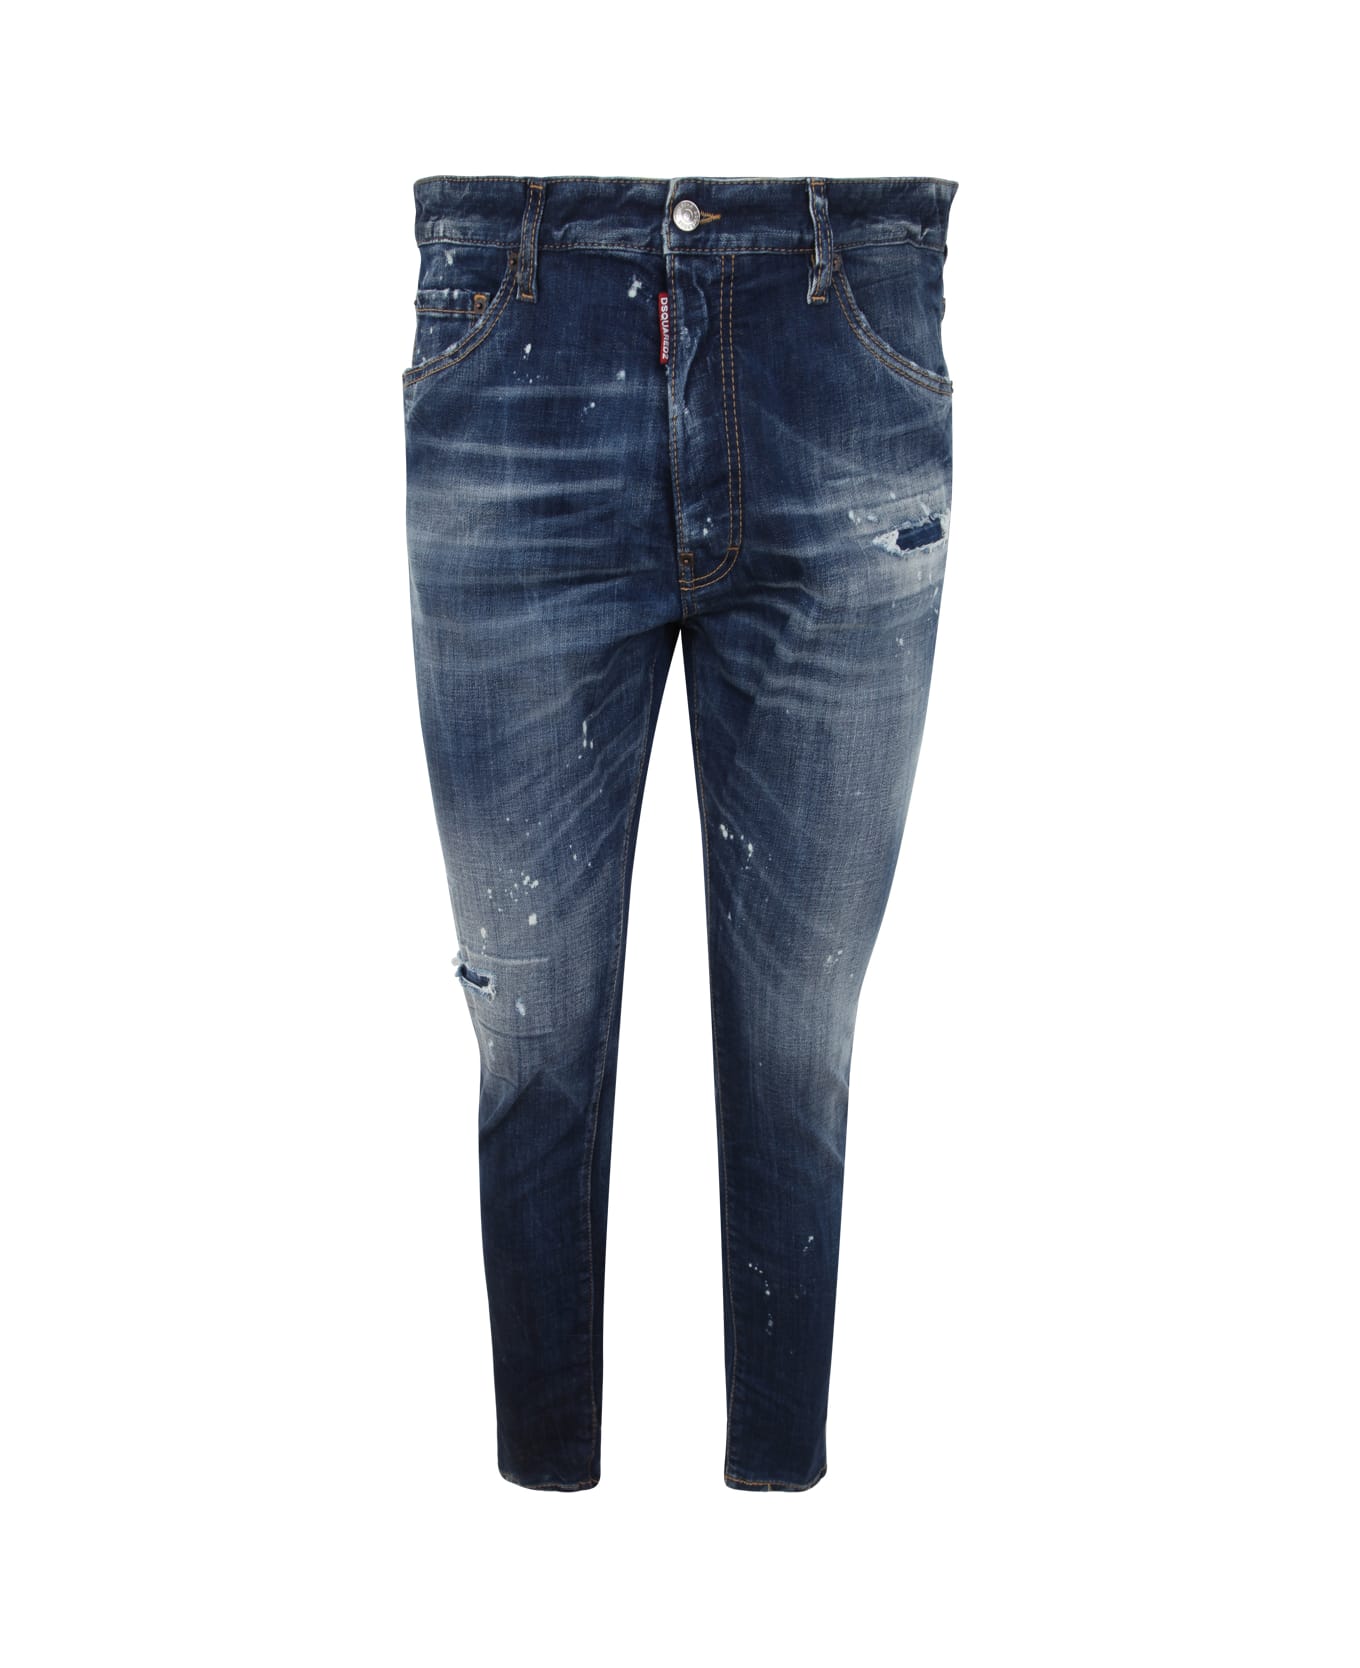 Dsquared2 Relax Long Crotch Jeans - Navy Blue